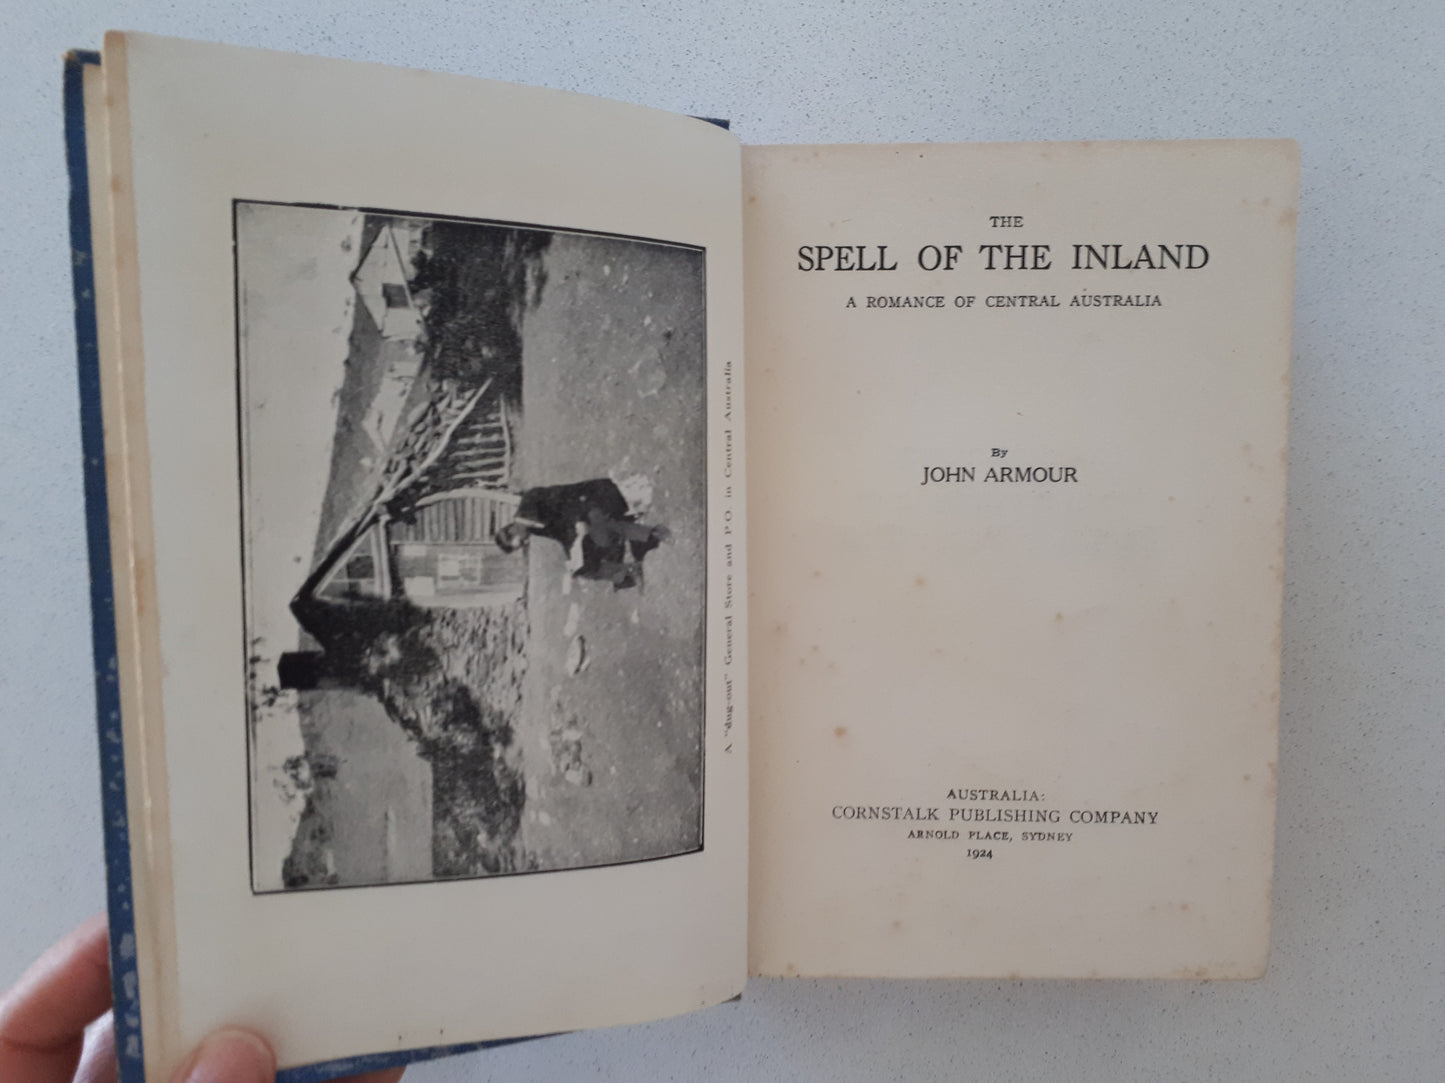 The Spell of the Inland by John Armour